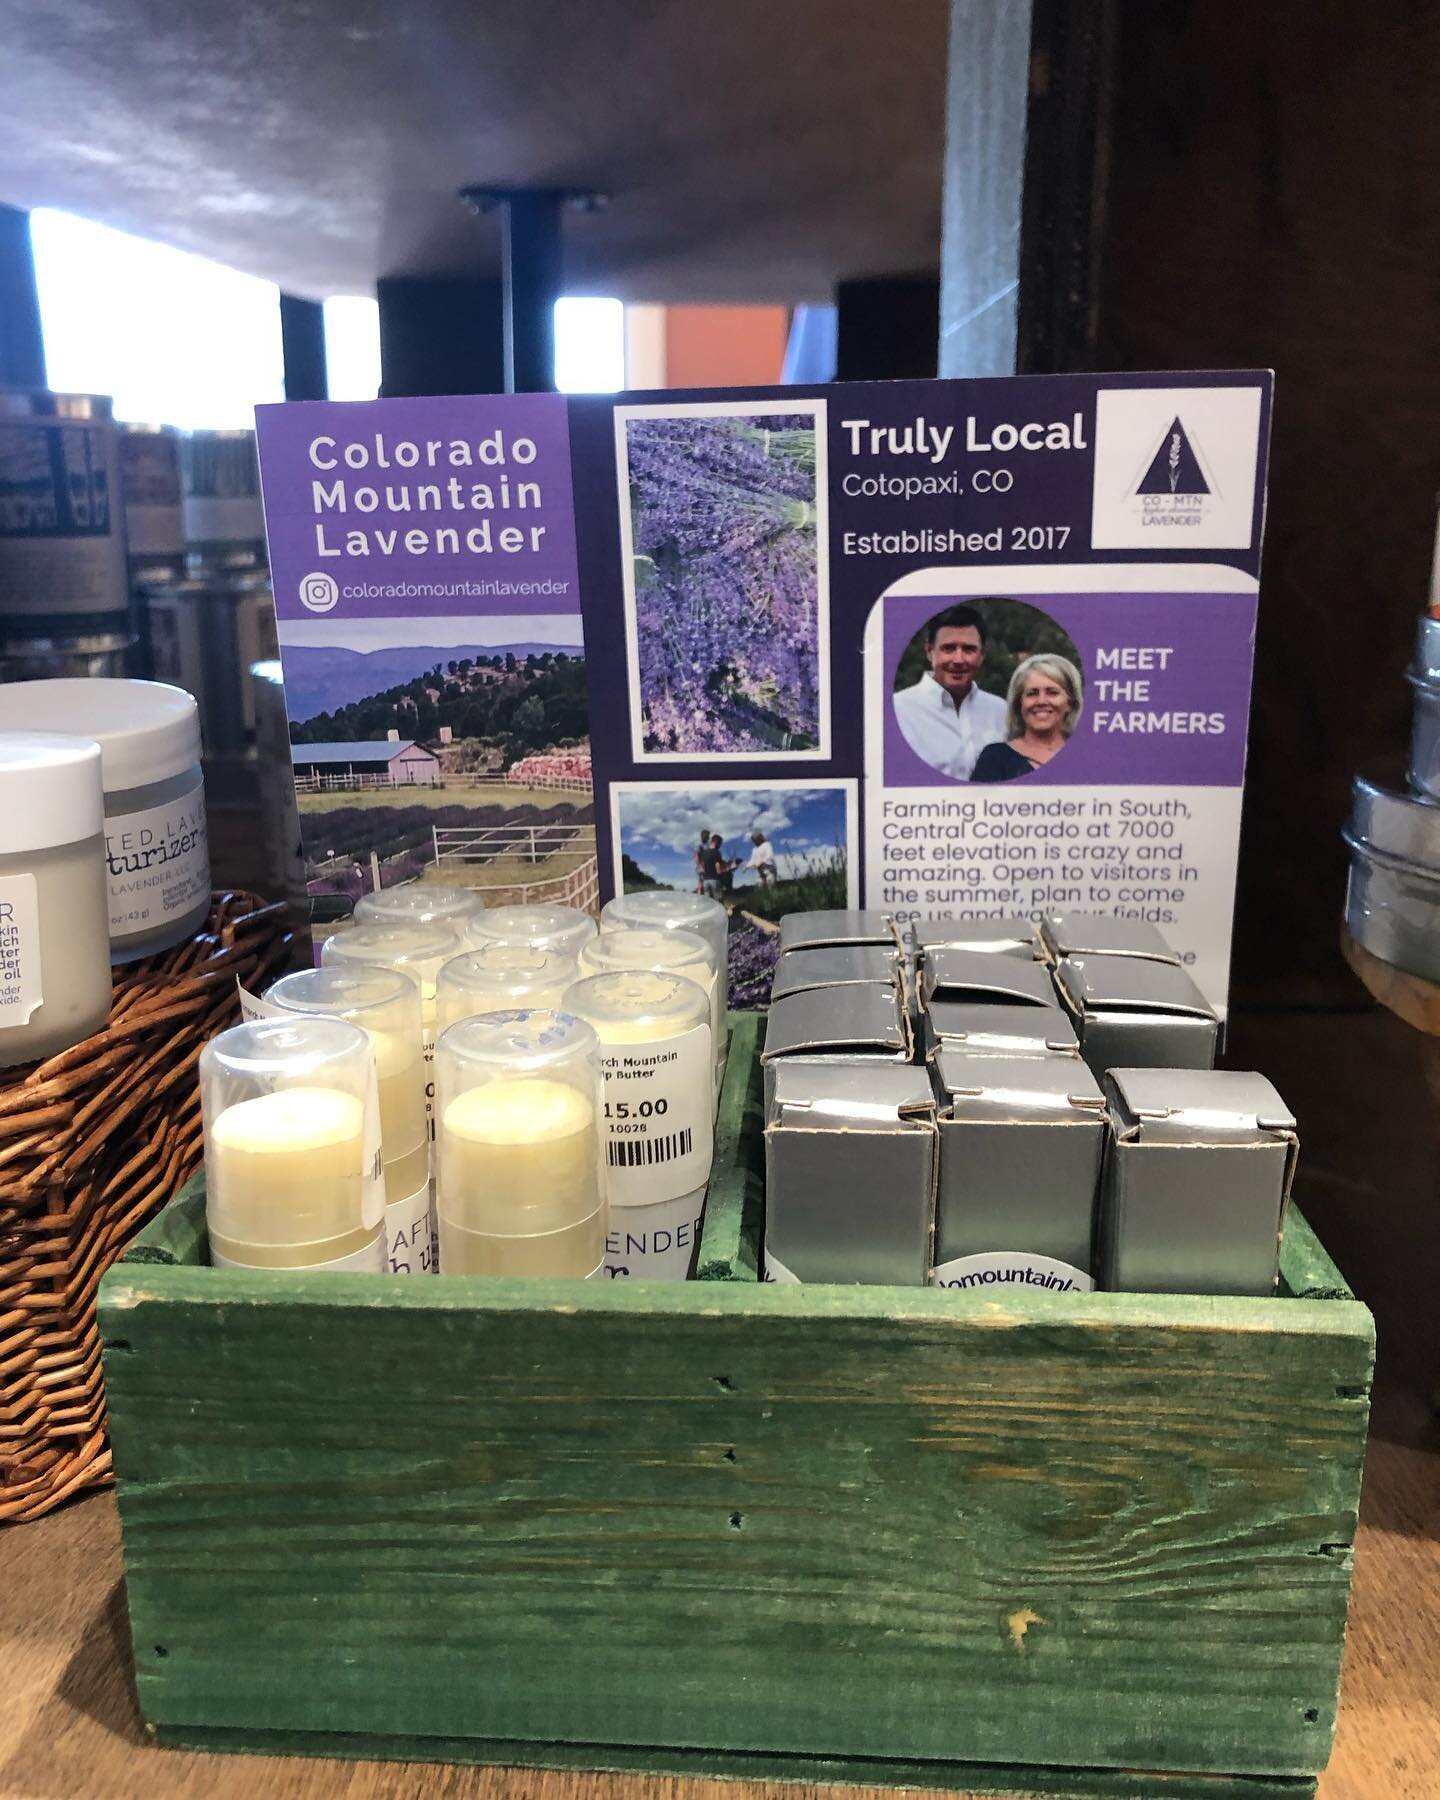 ICYMI: Colorado Mountain Lavender products are now available at @monarchatthecrest !! Swing by to ride the tram and grab your favorite products!
.
.
.
#salida #monarchmountian #continentaldivide